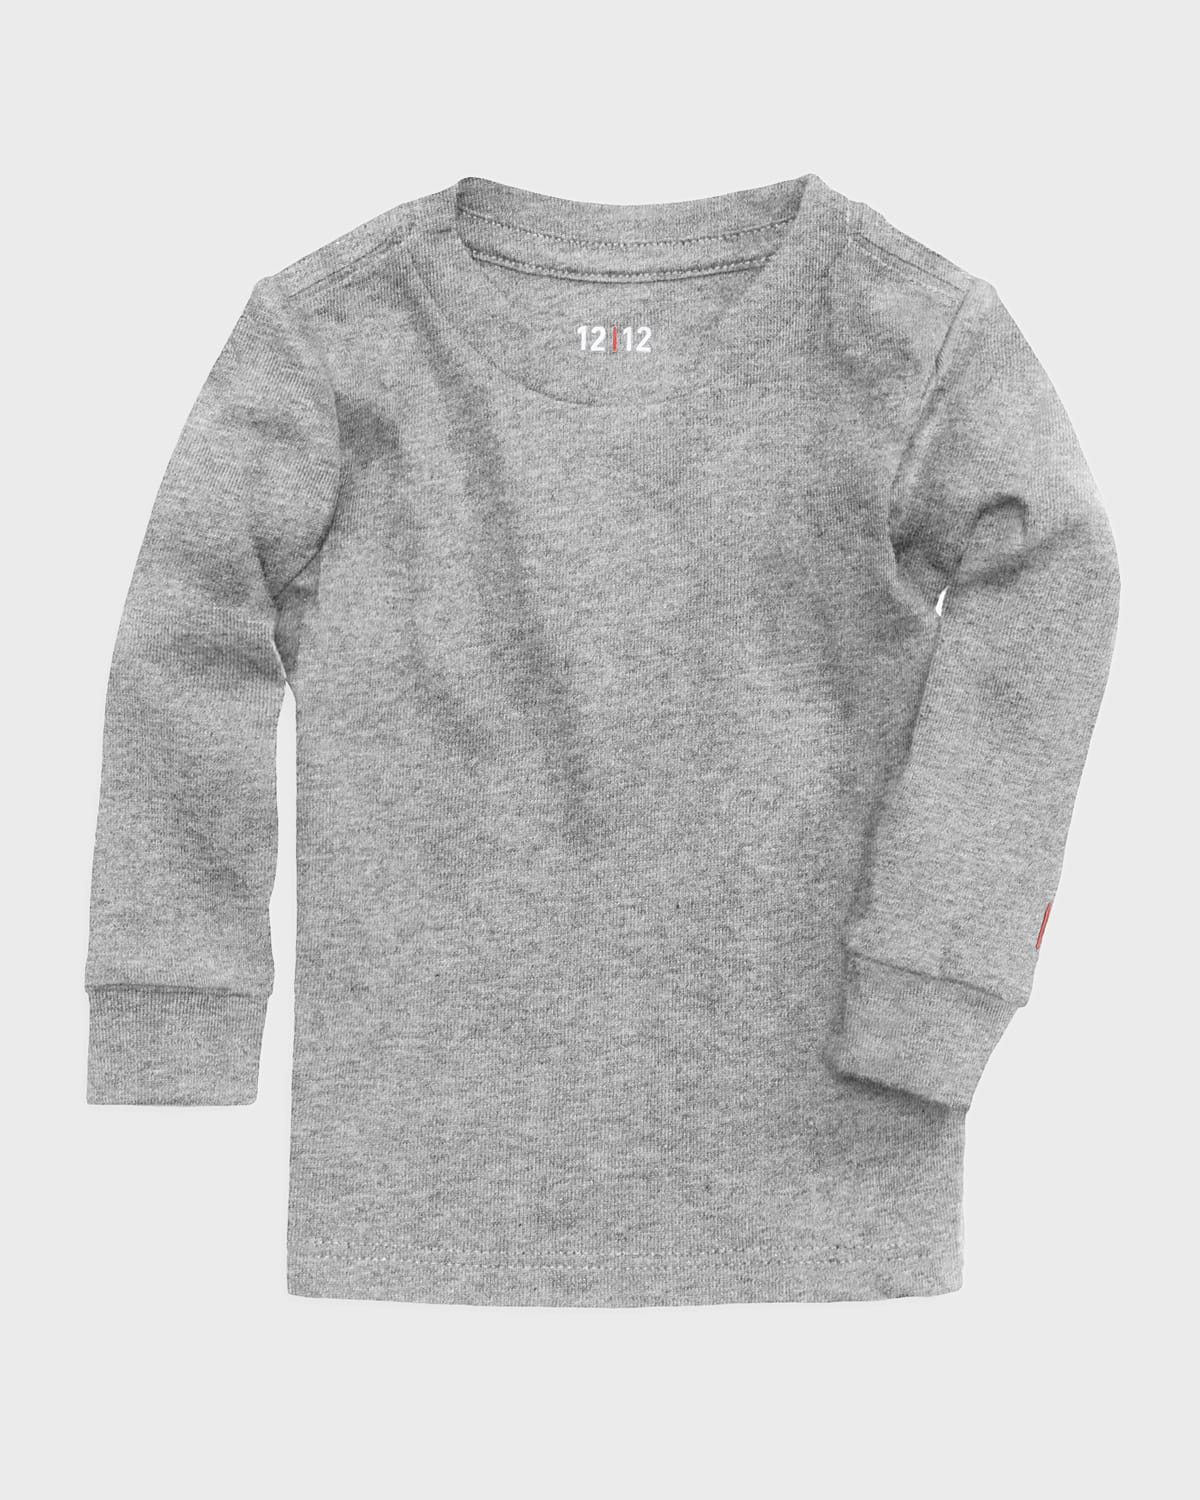 Kid's The Daily Solid Organic Cotton Sweatshirt, Size 0-6